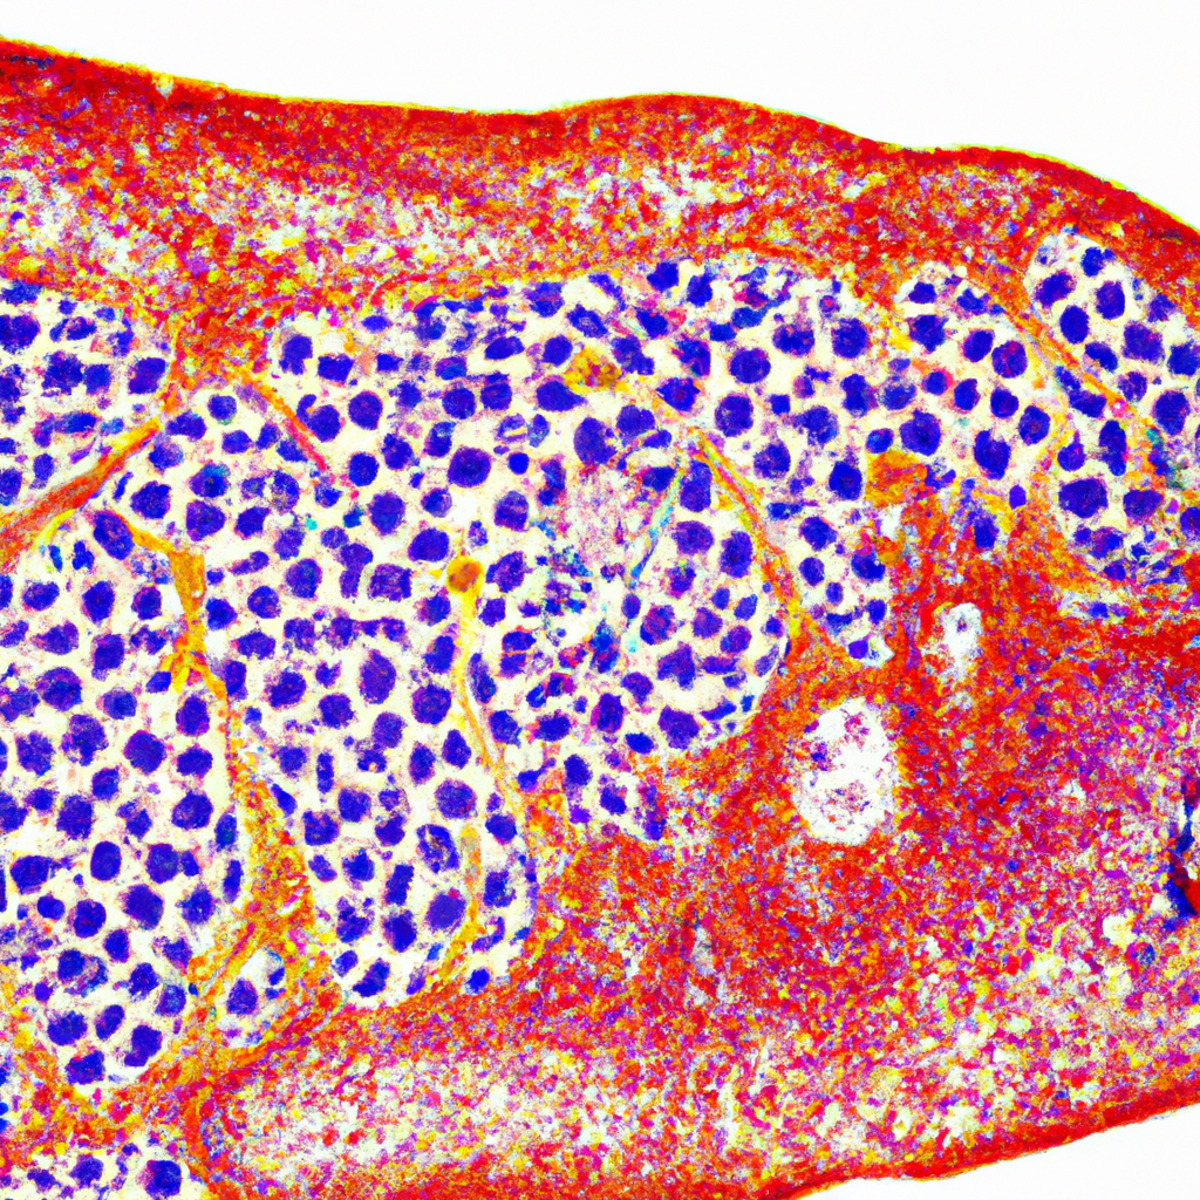 Microscope slide displaying intricate kidney tissue affected by Alport Syndrome, highlighting genetic impact on kidney function.Microscope slide displaying intricate kidney tissue affected by Alport Syndrome, highlighting genetic impact on kidney function.